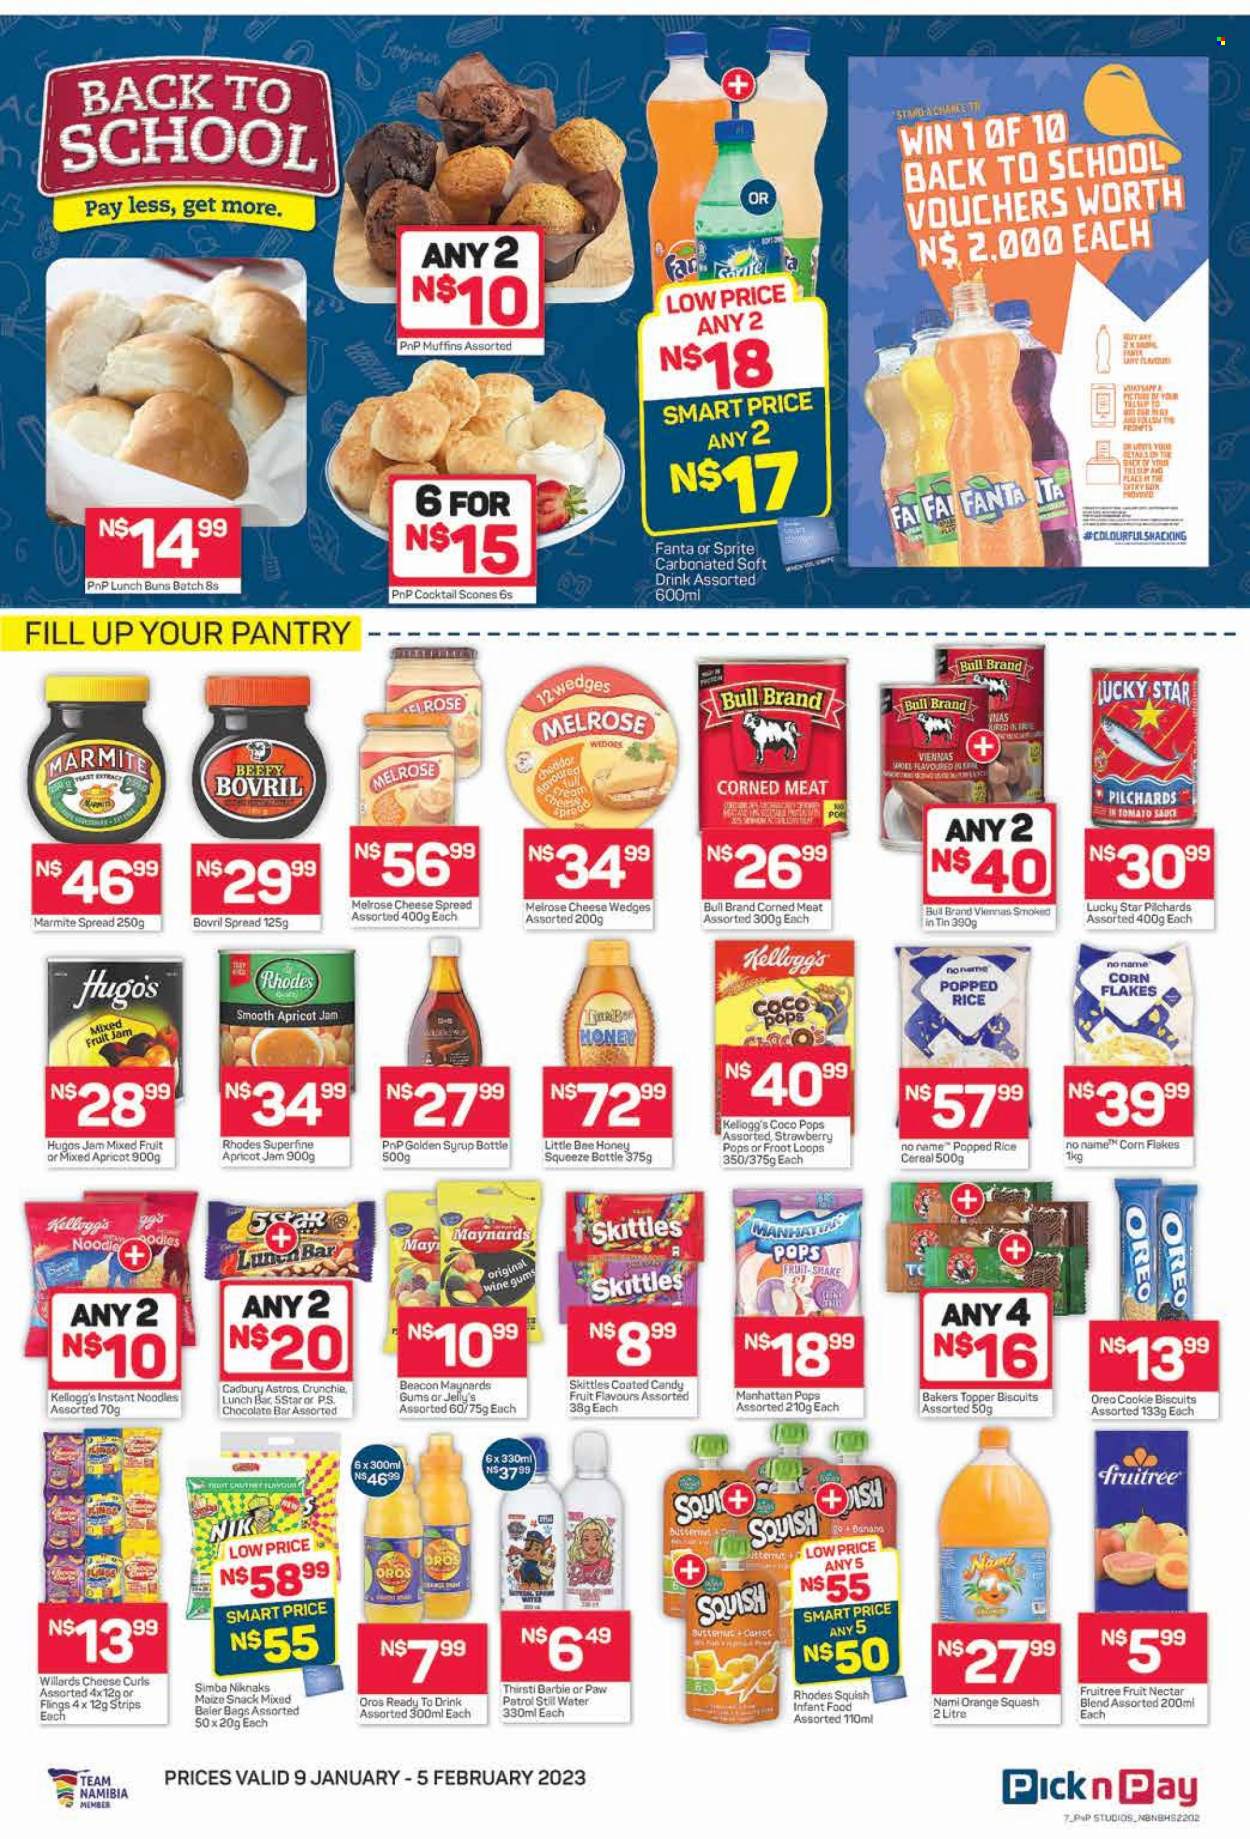 Pick n Pay catalogue  - 09/01/2023 - 05/02/2023 - Sales products - buns, muffin, sardines, No Name, instant noodles, noodles, vienna sausage, cheese spread, Melrose, Oreo, shakes, yeast, strips, Paw Patrol, snack, Kellogg's, biscuit, Cadbury, Skittles, chocolate bar, maize snack, Simba, corned meat, cereals, corn flakes, coco pops, rice, apricot jam, honey, jam, syrup, Sprite, Fanta, fruit nectar, soft drink, Oros, orange squash, mineral water, bottled water, carbonated soft drink, rosé wine, Bakers. Page 7.